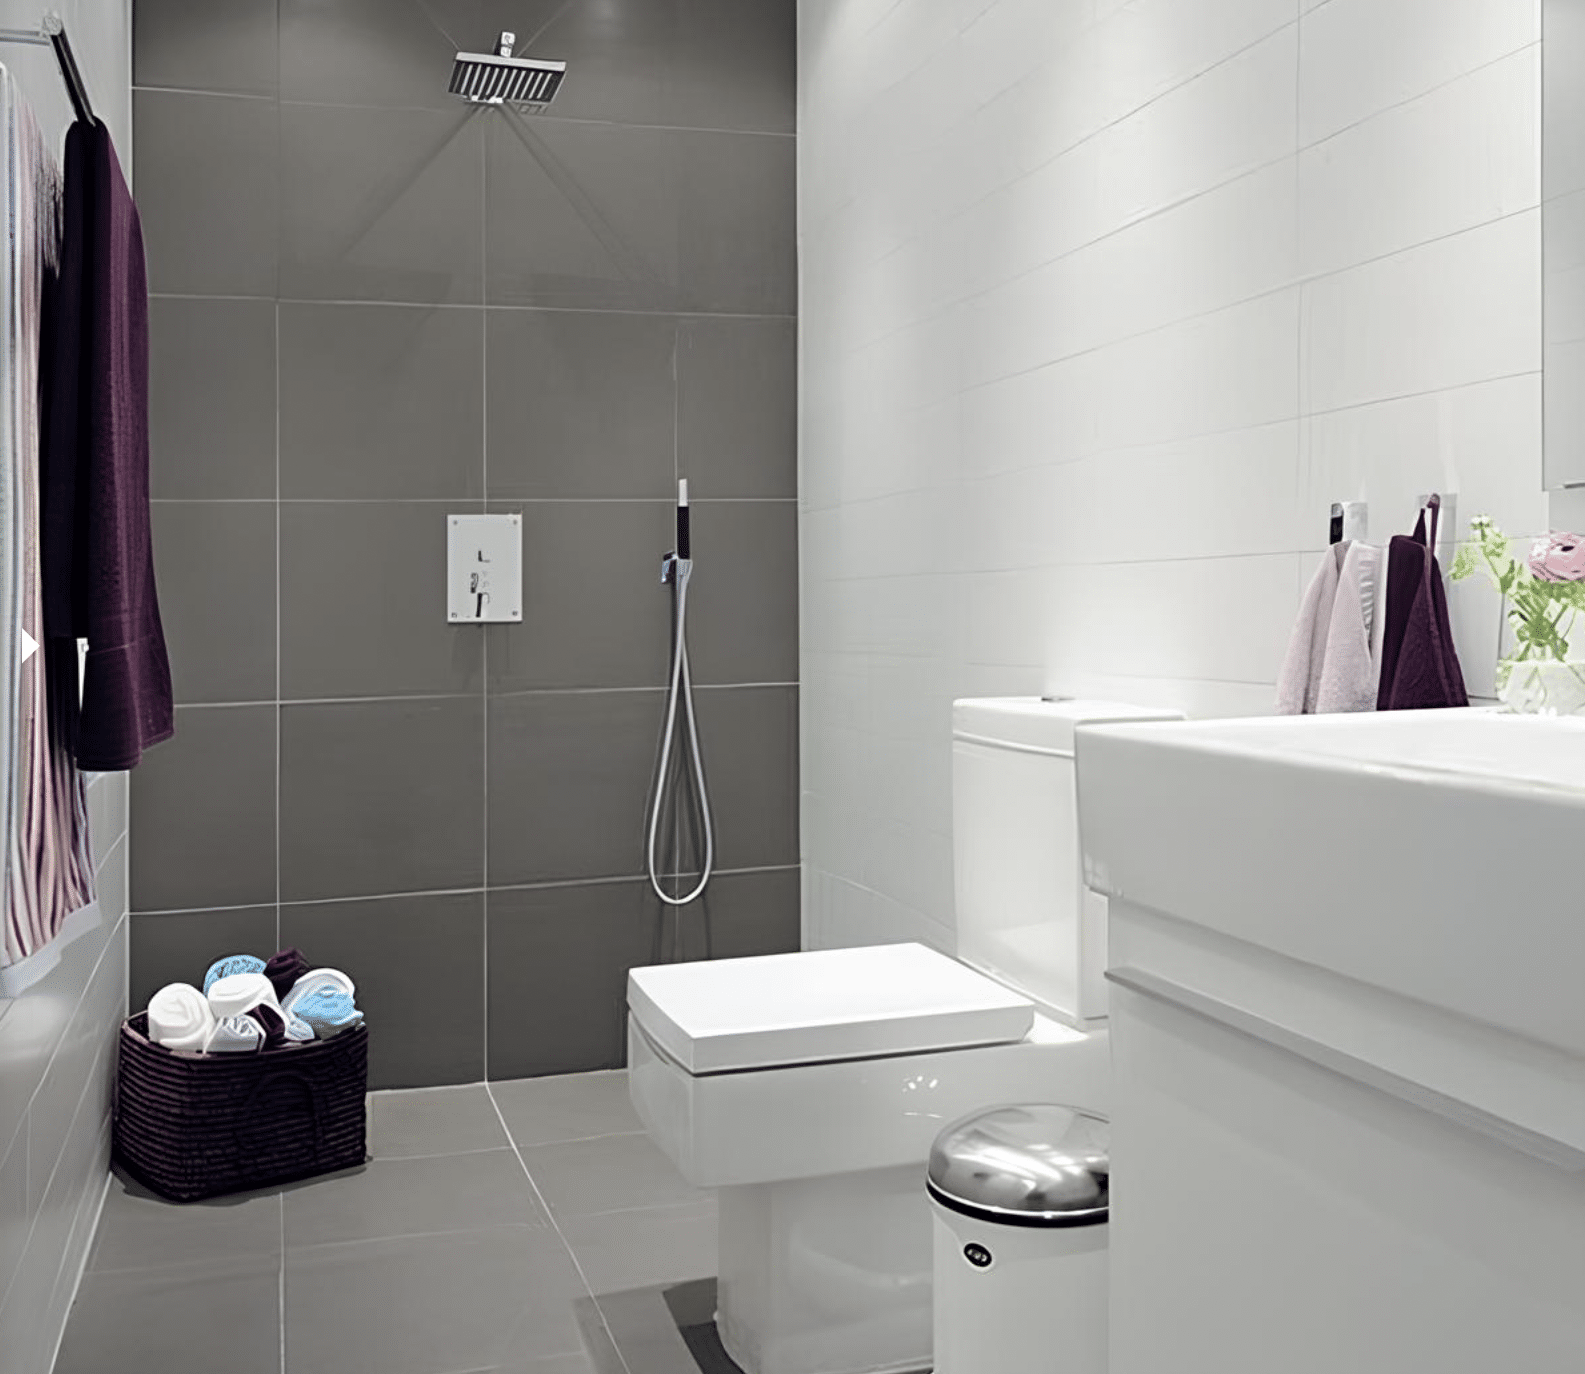 Should You Position the Toilet Beside the Shower?